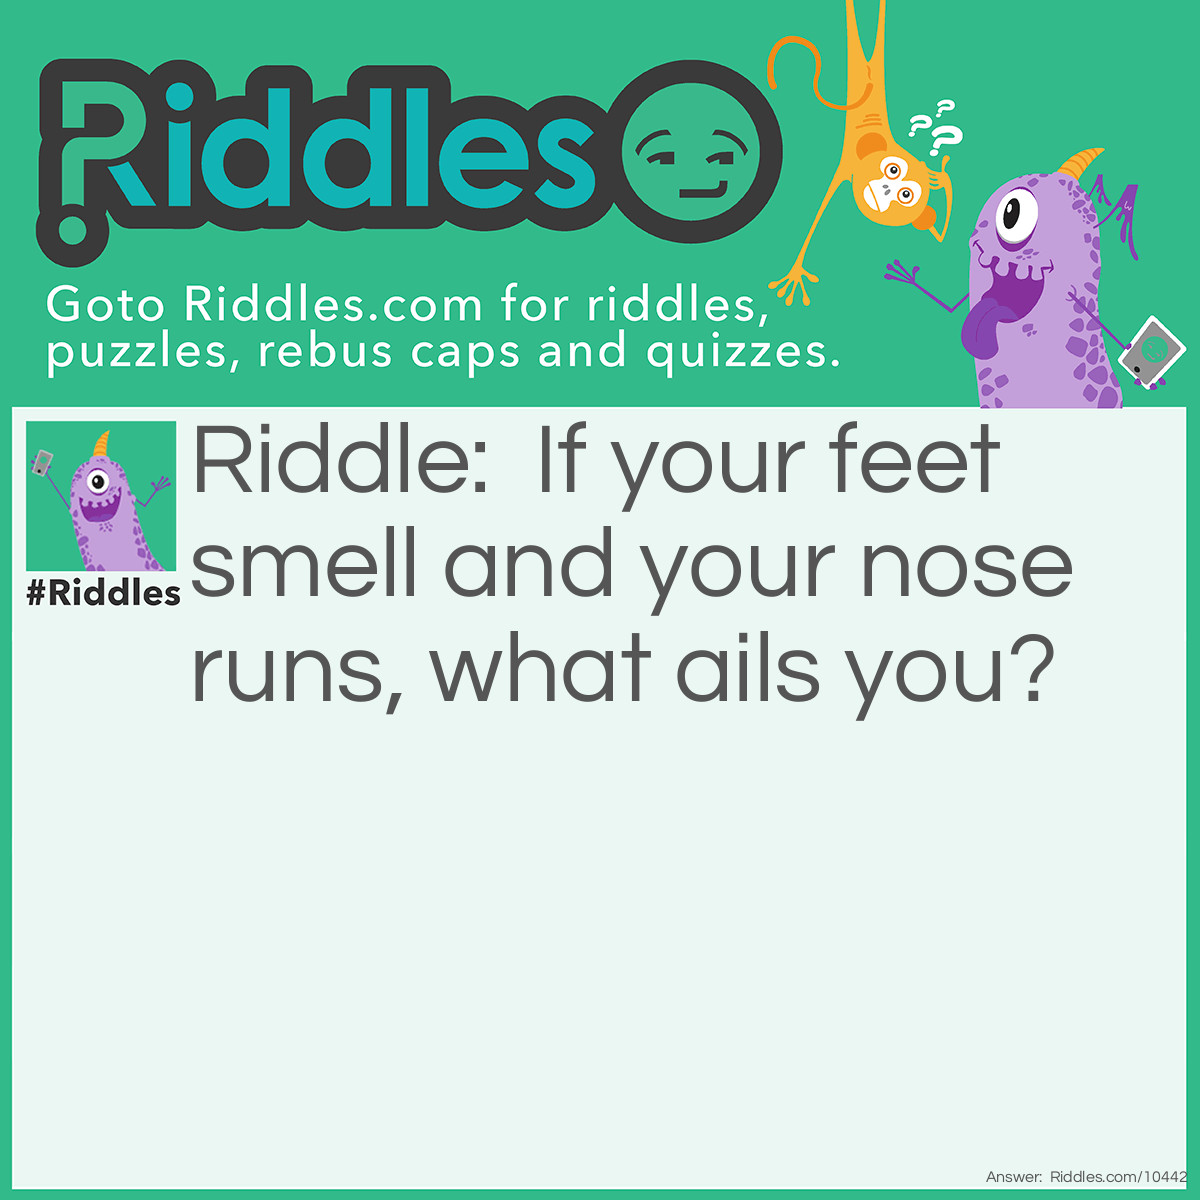 Riddle: If your feet smell and your nose runs, what ails you? Answer: You are upside down.